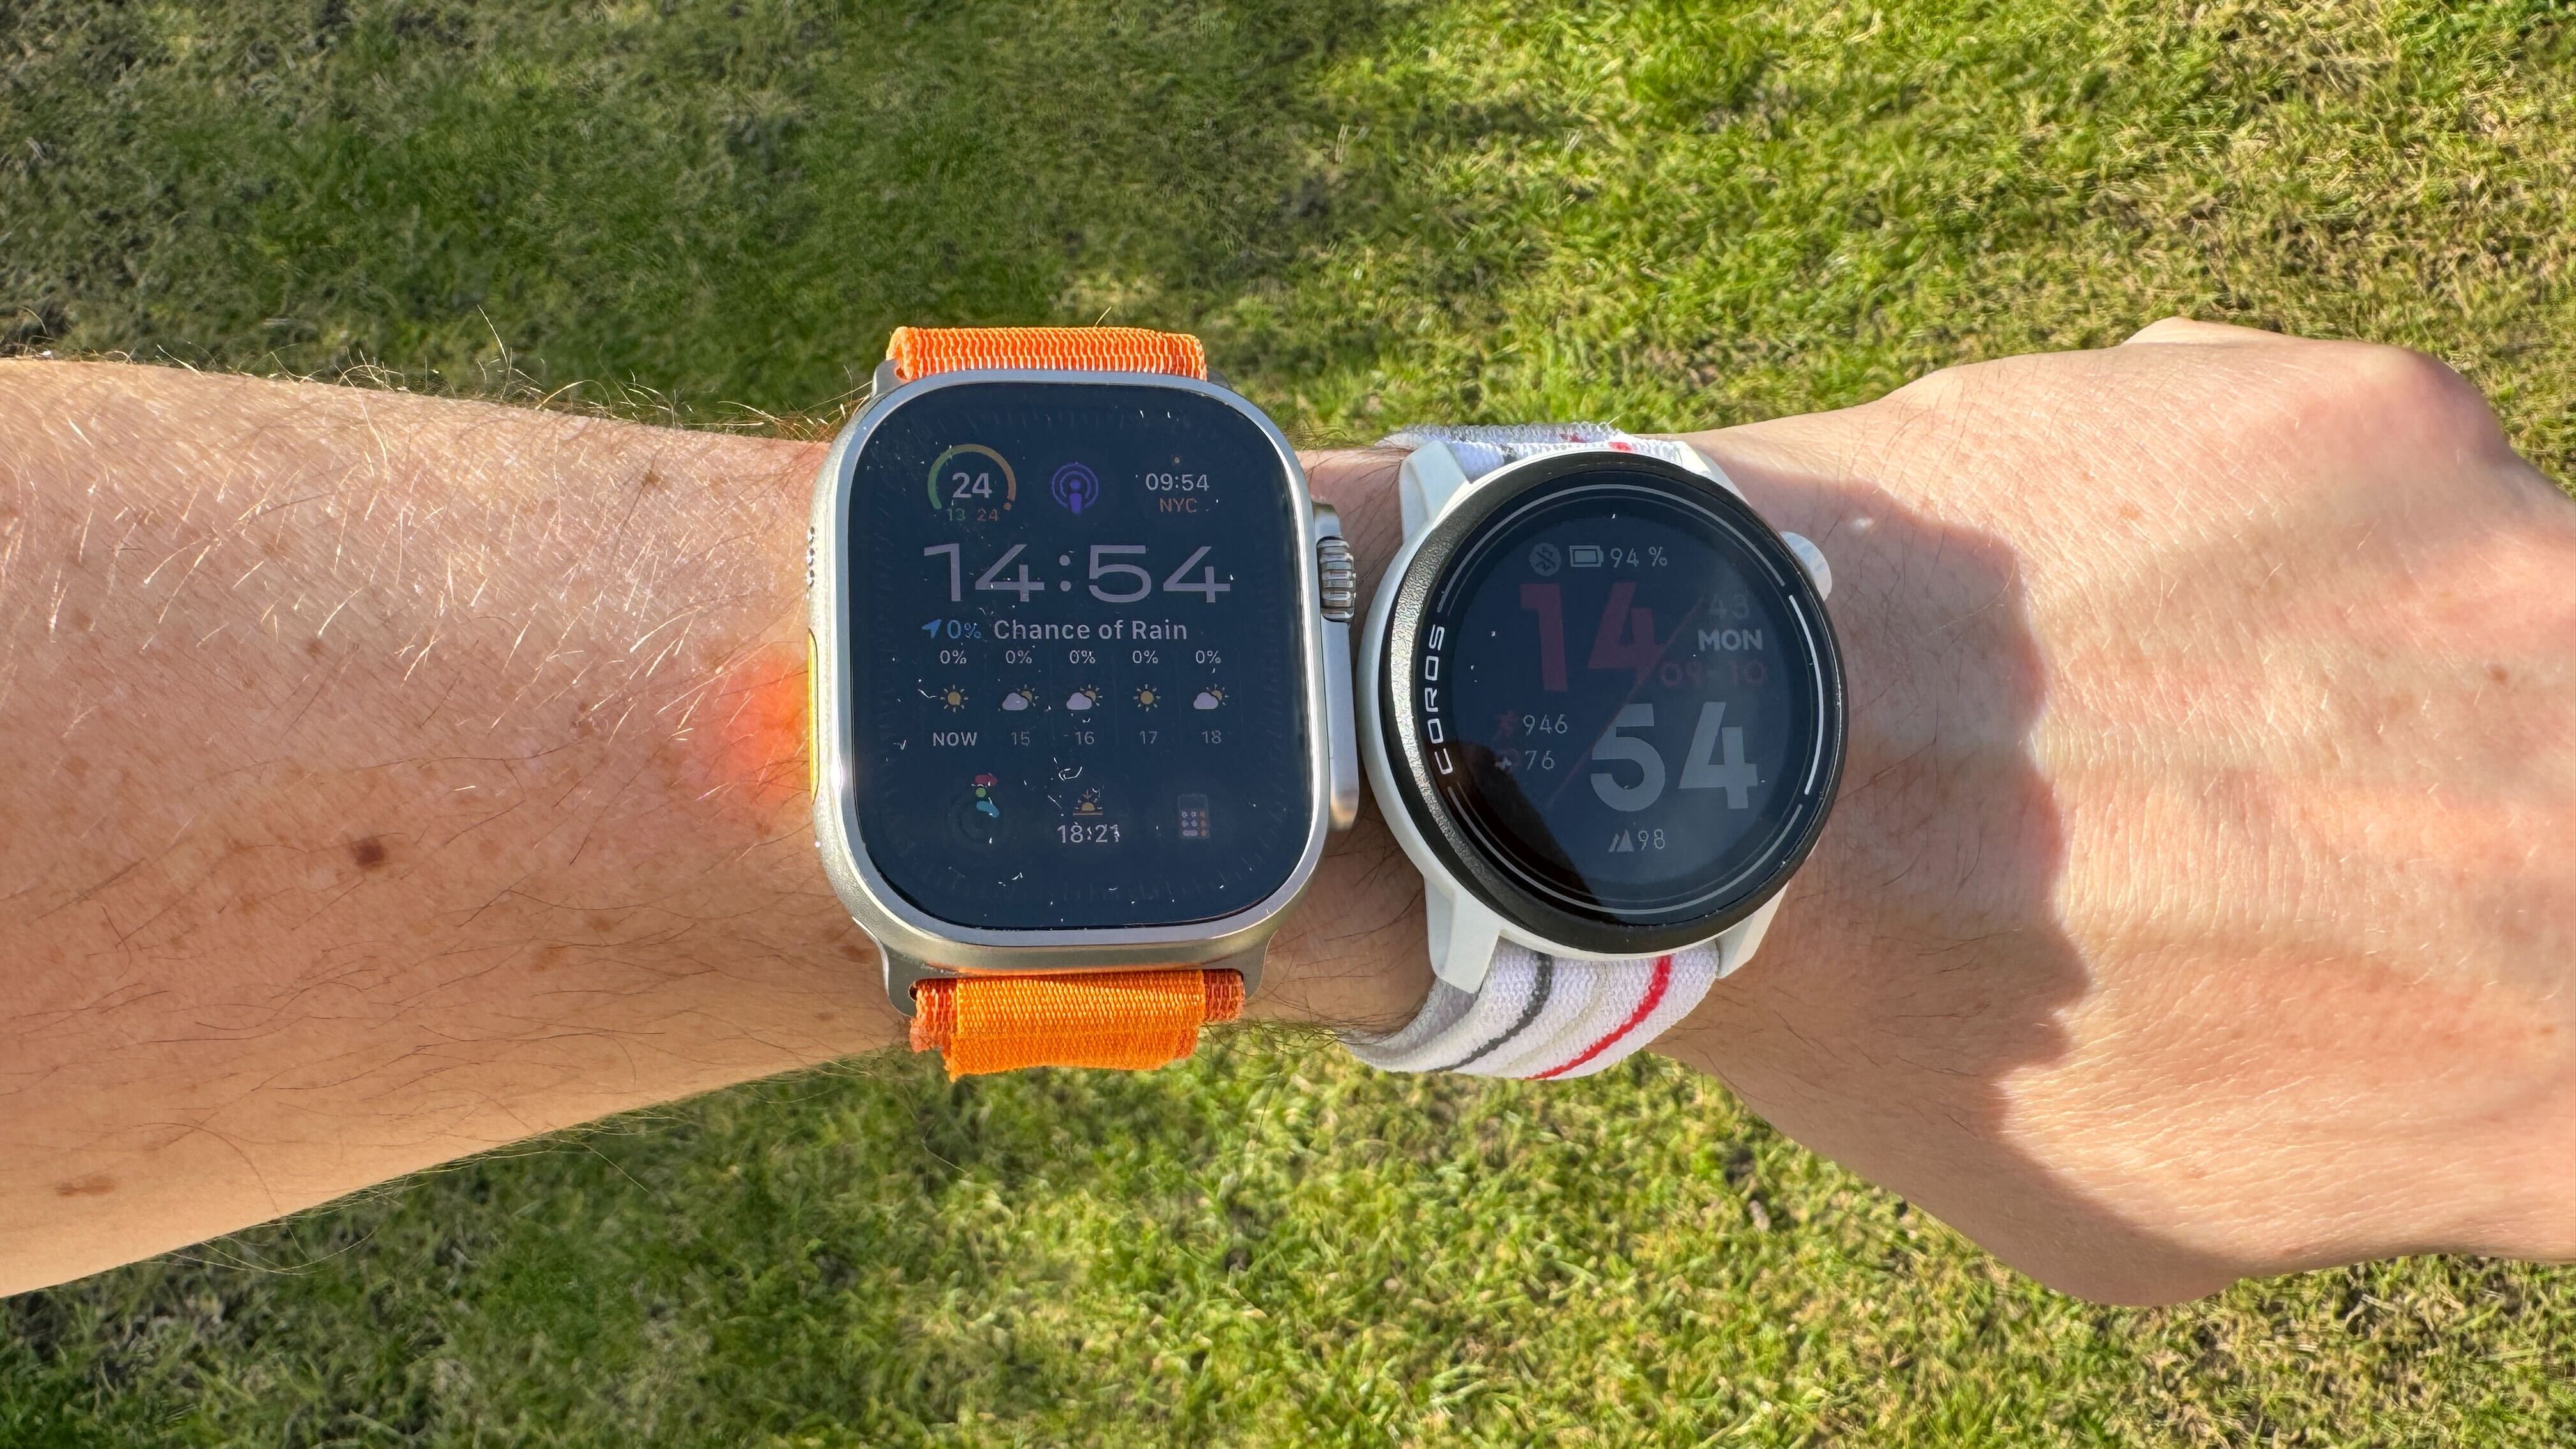 I ran a 10K with the Apple Watch Ultra 2 and Coros Pace 3 — and this watch  was better